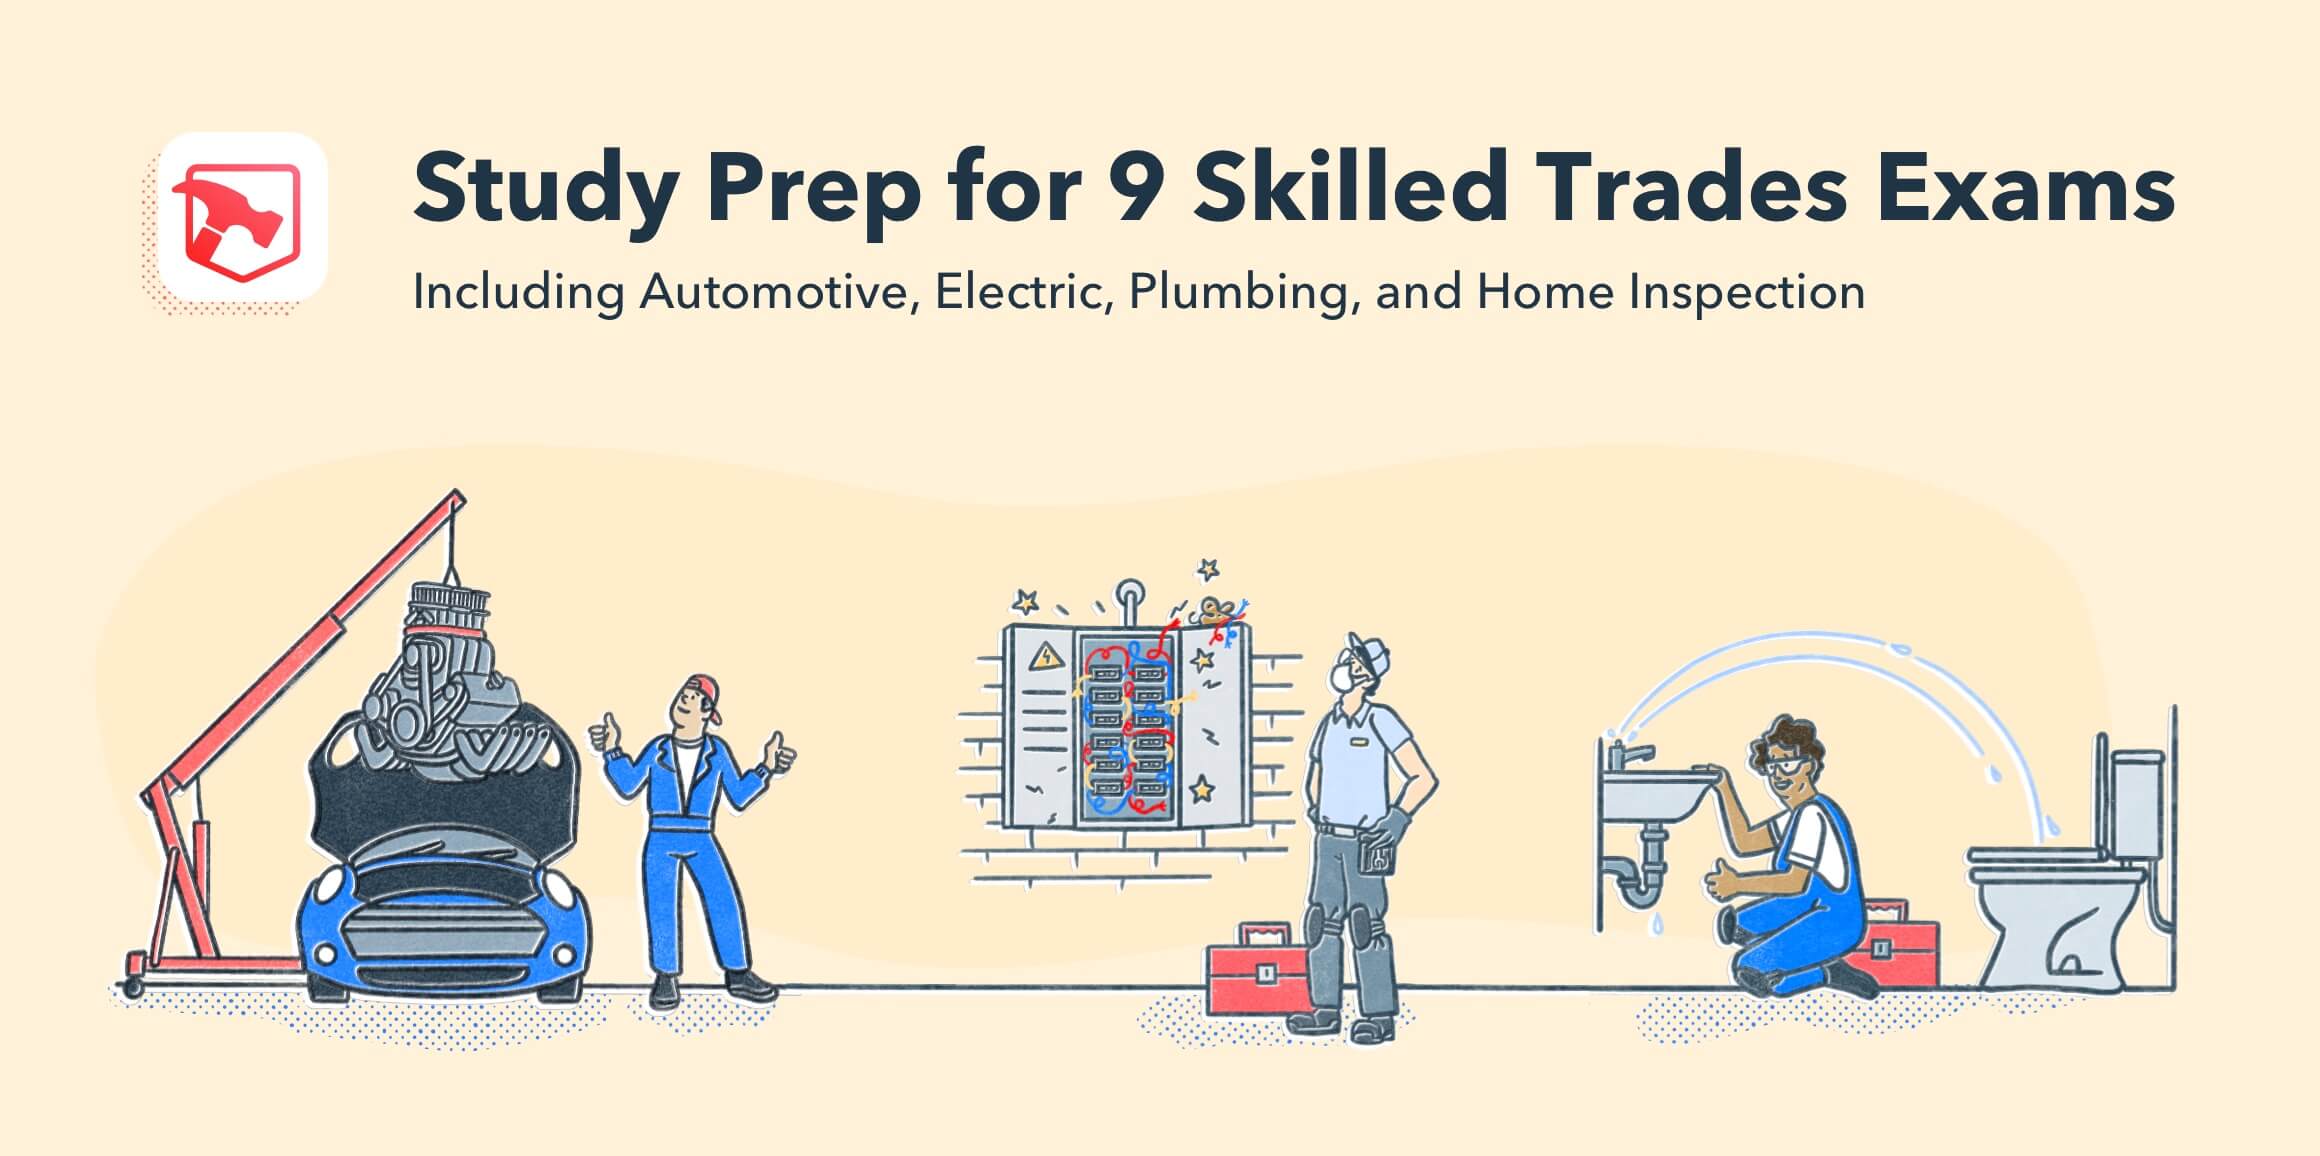 Promotional image of Skilled Trades App with app icon and illustrations of a mechanic, a home inspector, and a plumber.